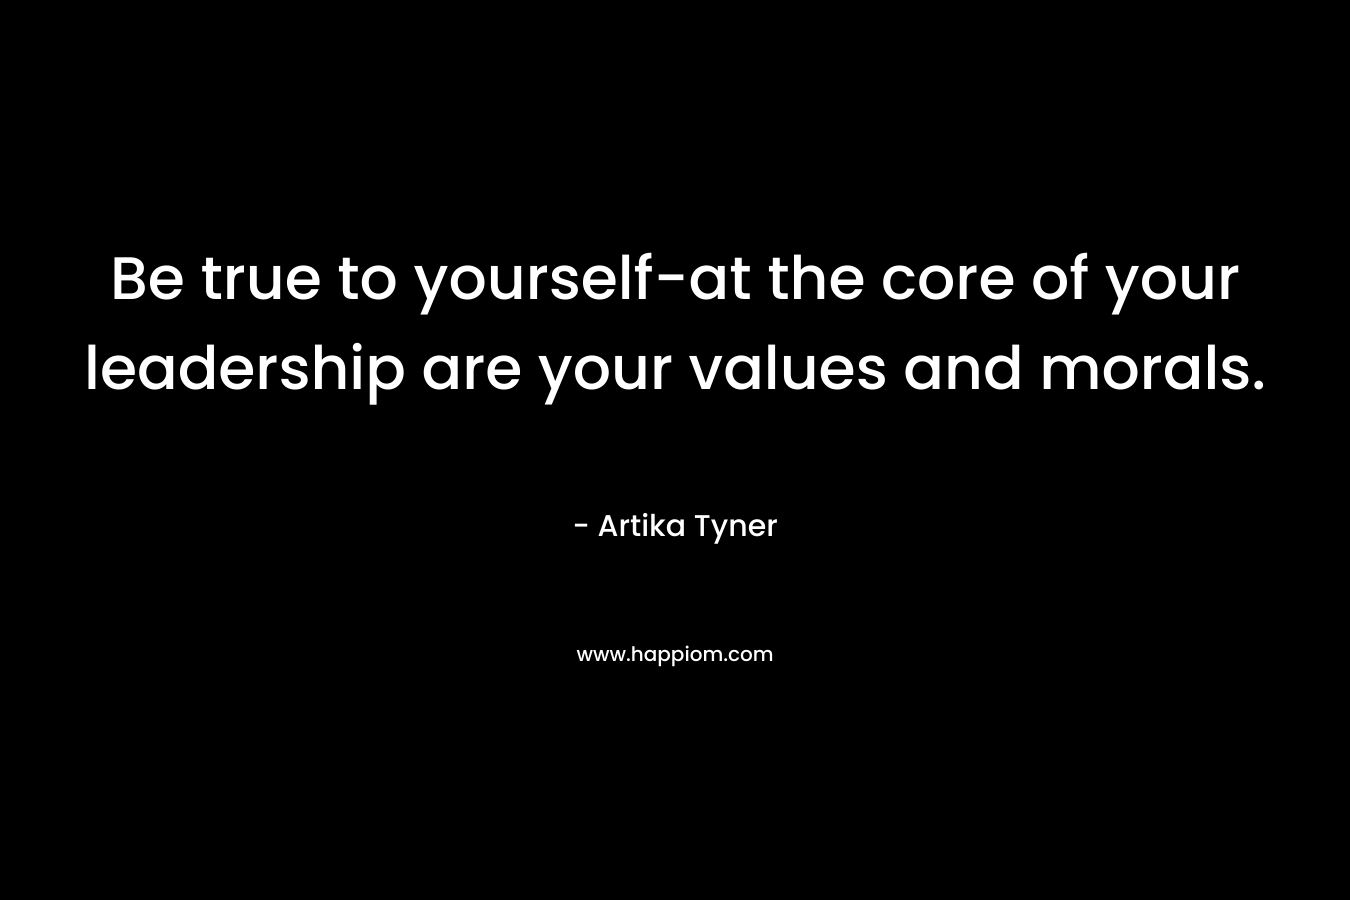 Be true to yourself-at the core of your leadership are your values and morals. – Artika Tyner